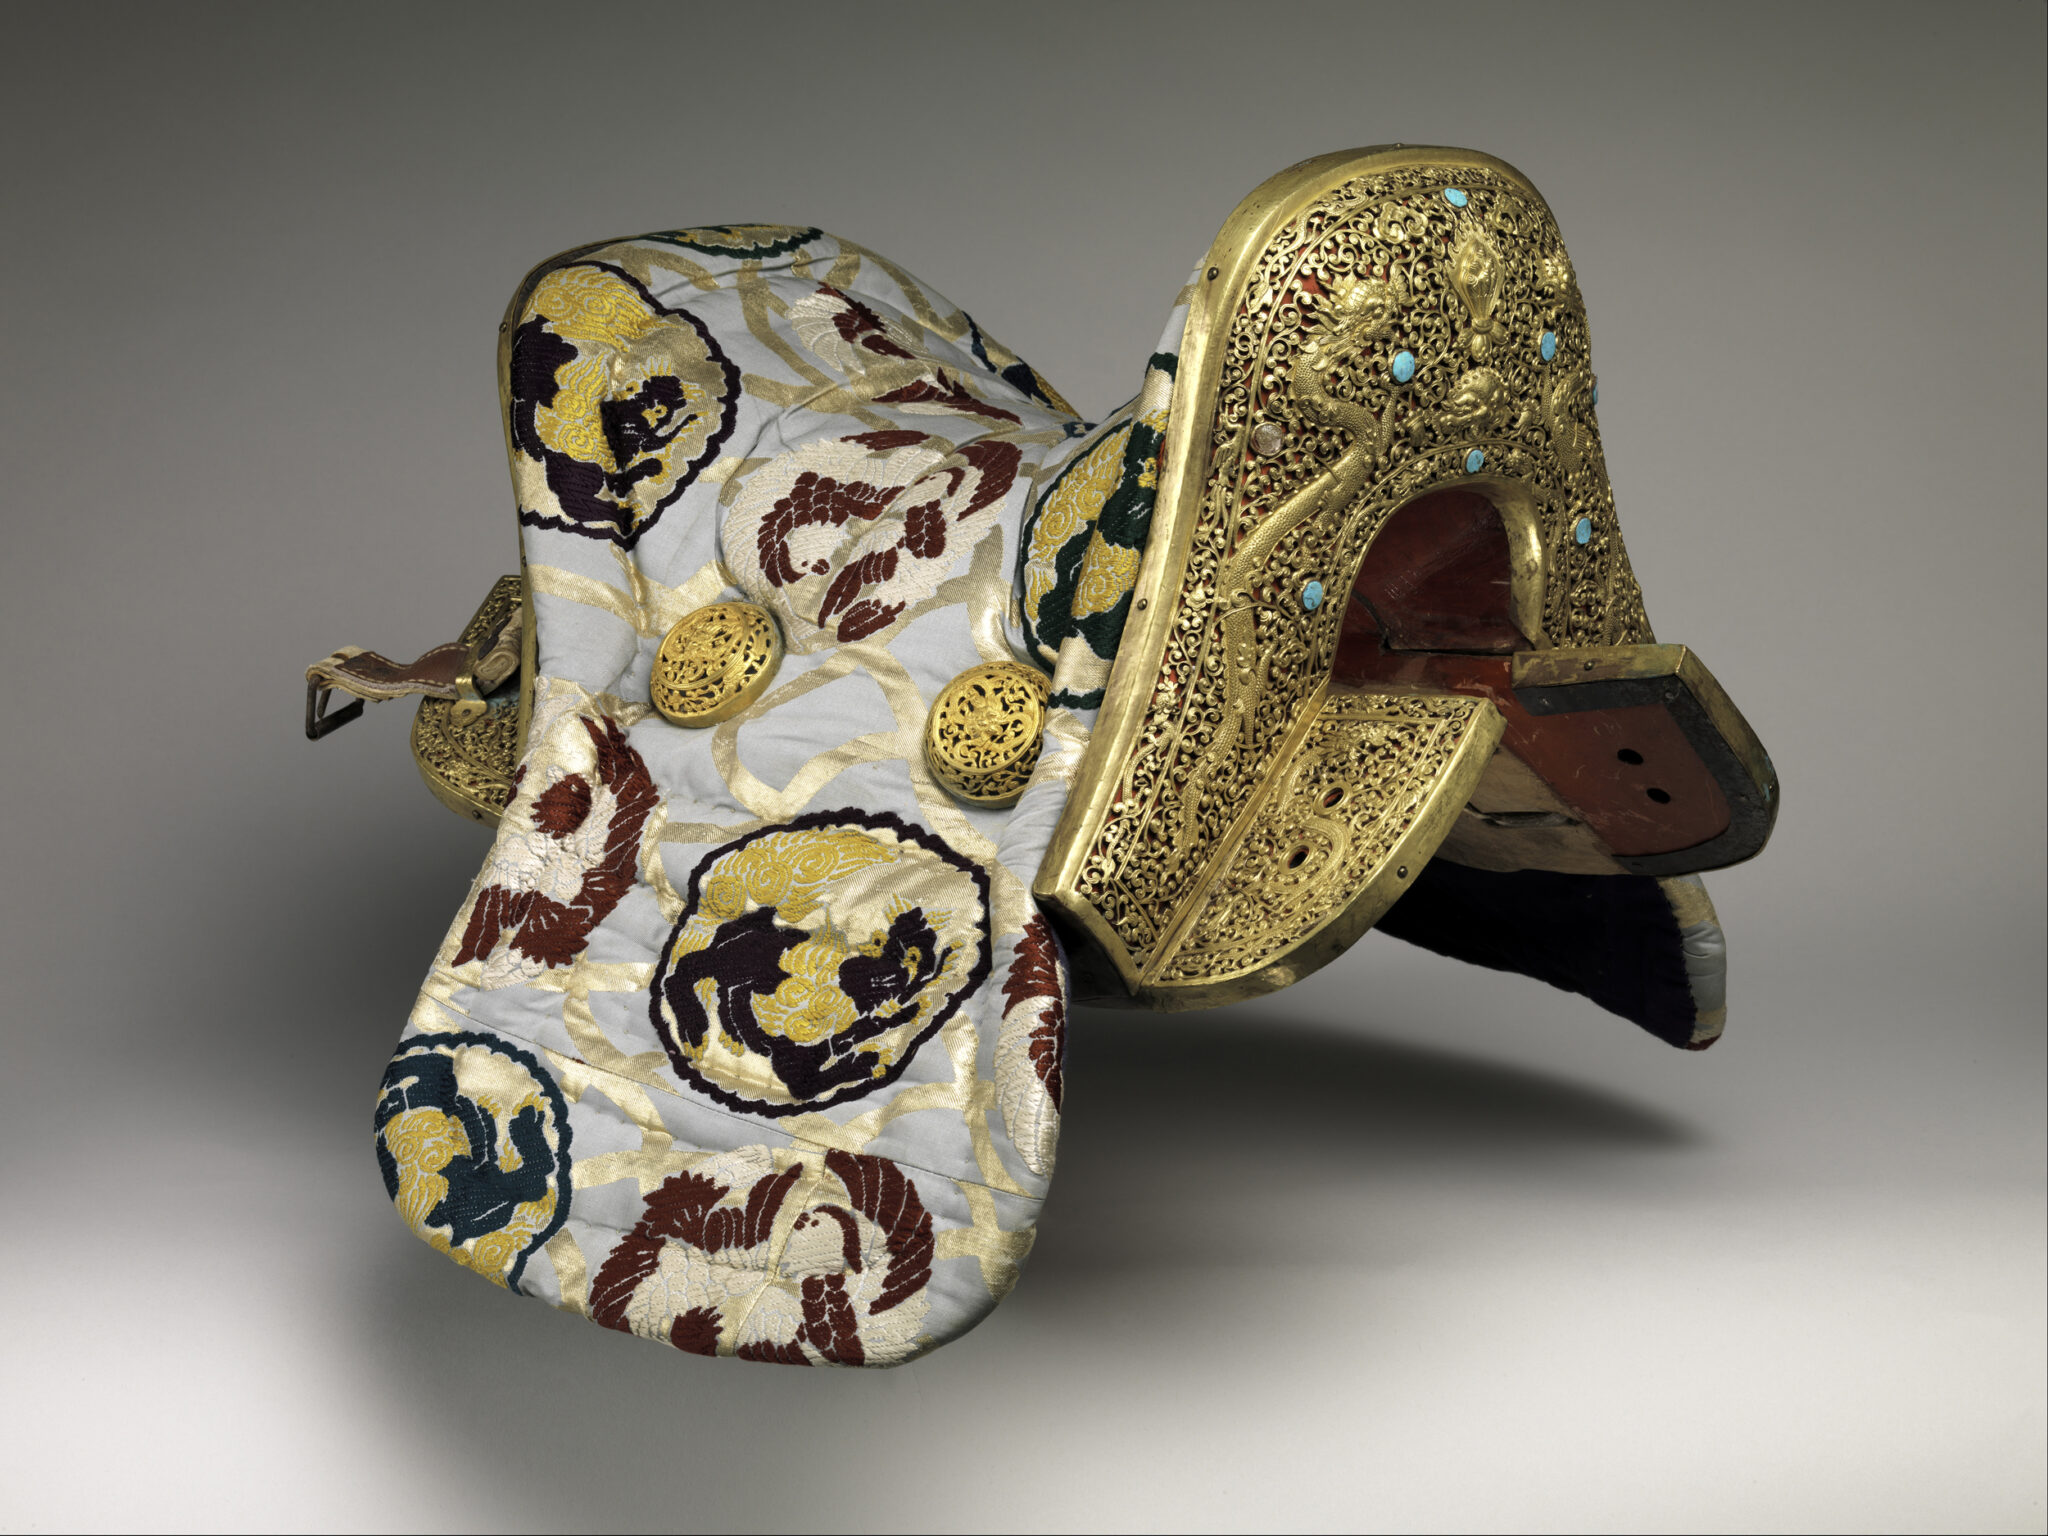 Golden filigreed saddle featuring turquoise insets; upholstered in blue, yellow, and red roundel-pattern textile